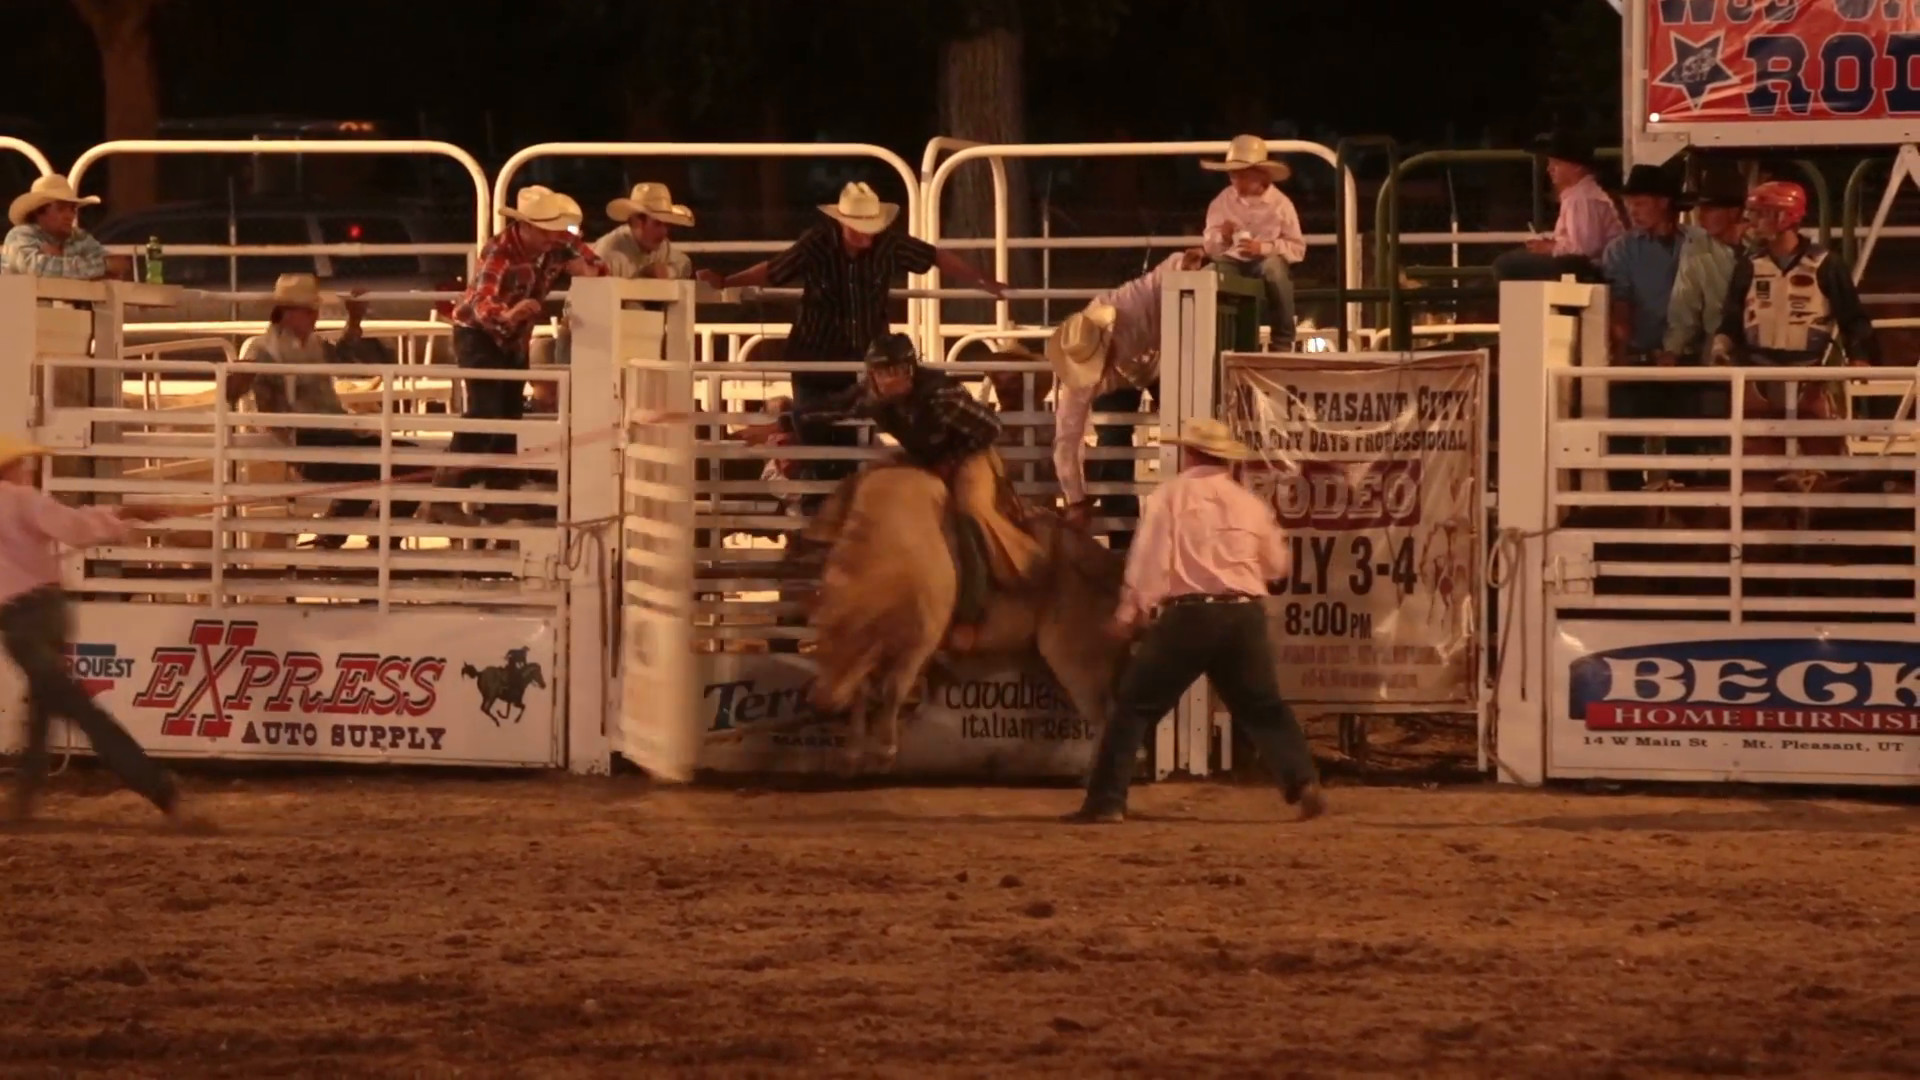 1920x1080 Rodeo bull ride night rural town. Rural fair, rodeo and community  celebration for 4th